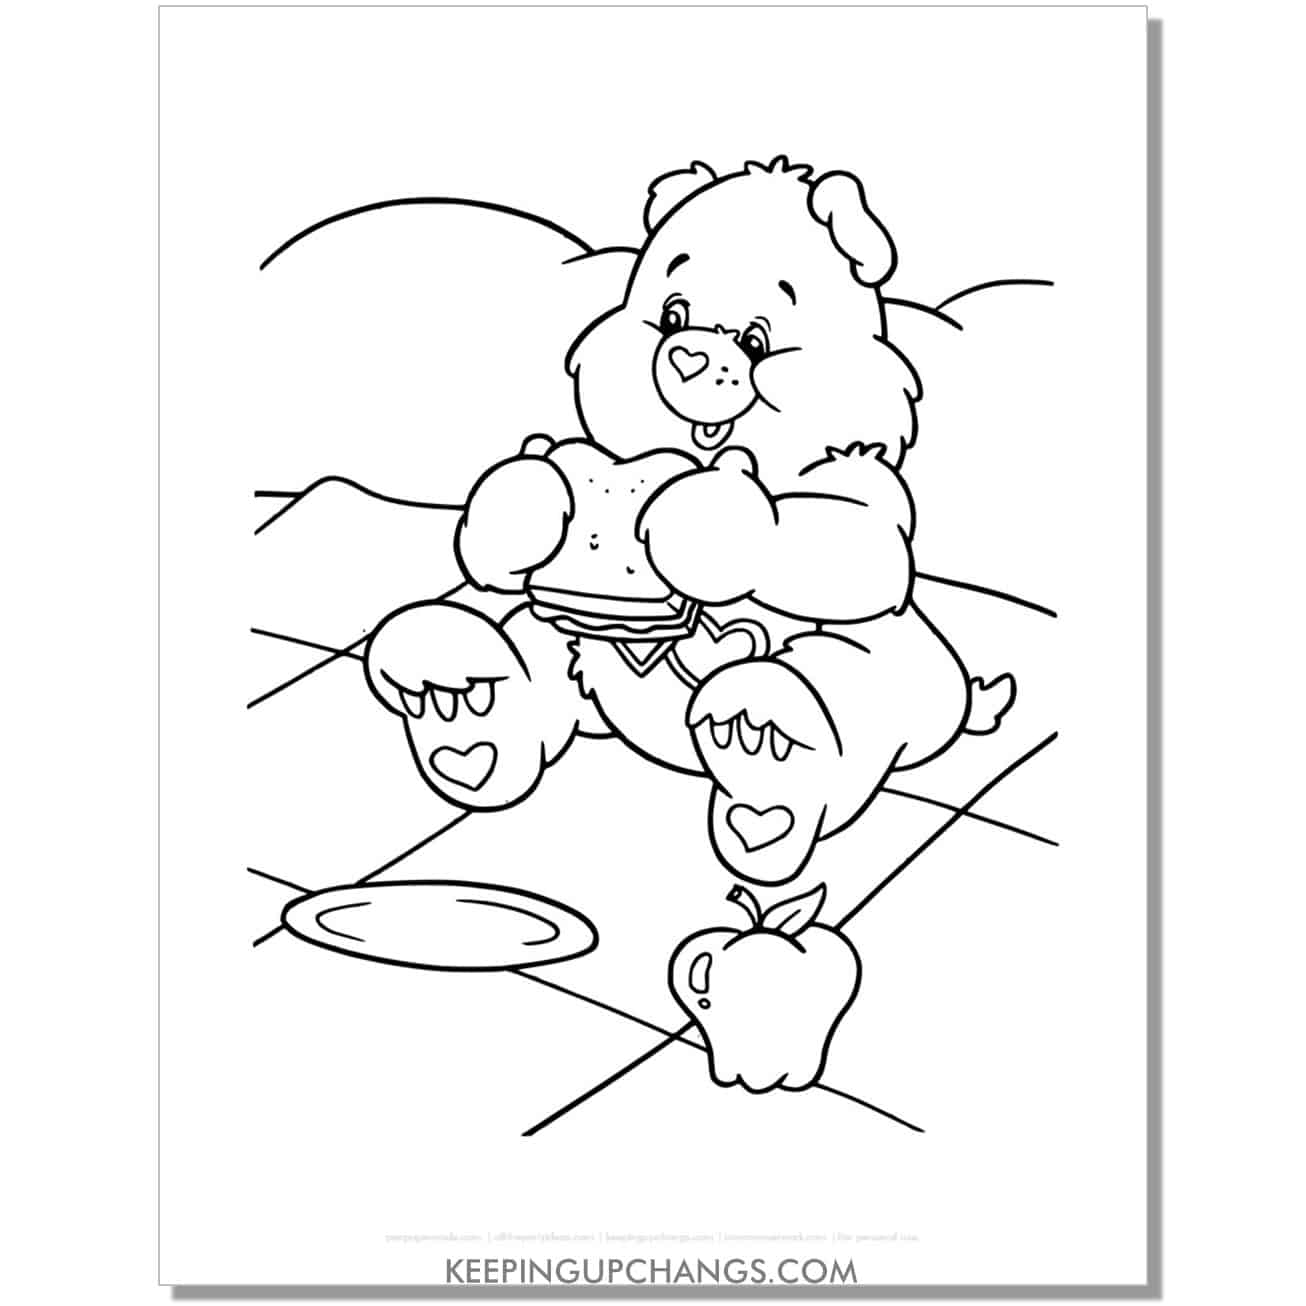 always there bear sandwich picnic care bear coloring page, sheet.